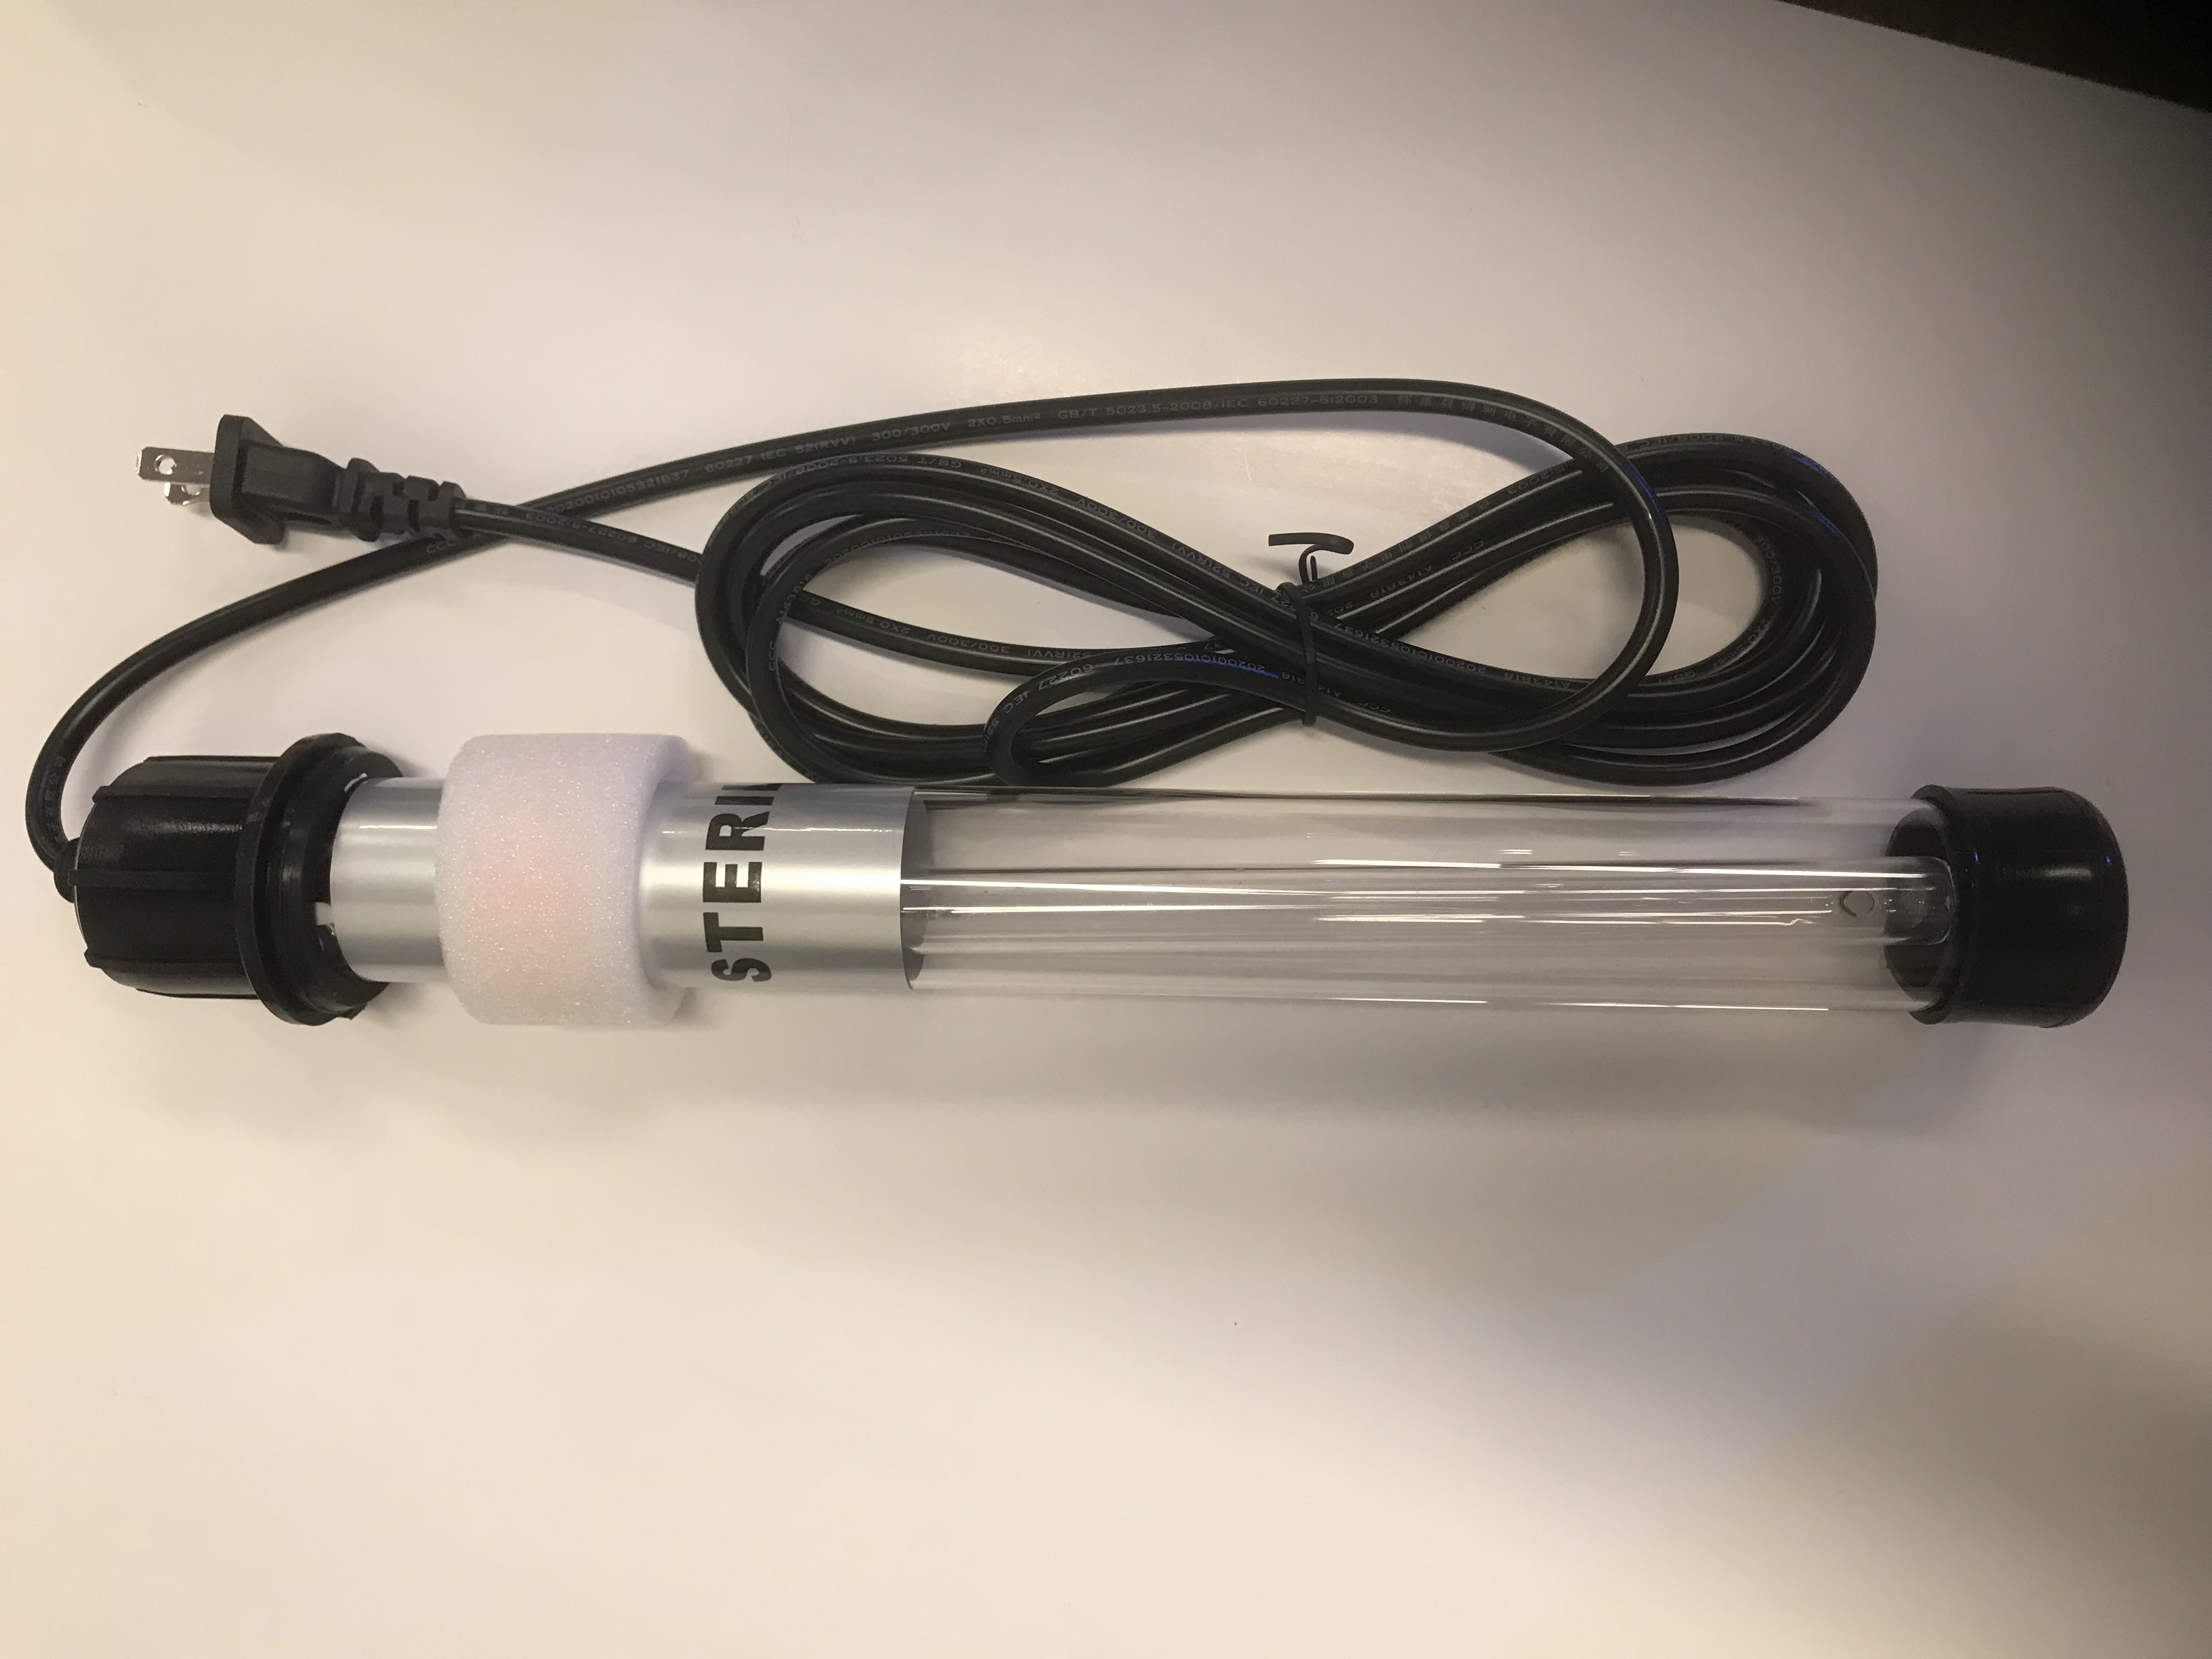 40W Drop In UV Light Submersible *FREE SHIPPING*